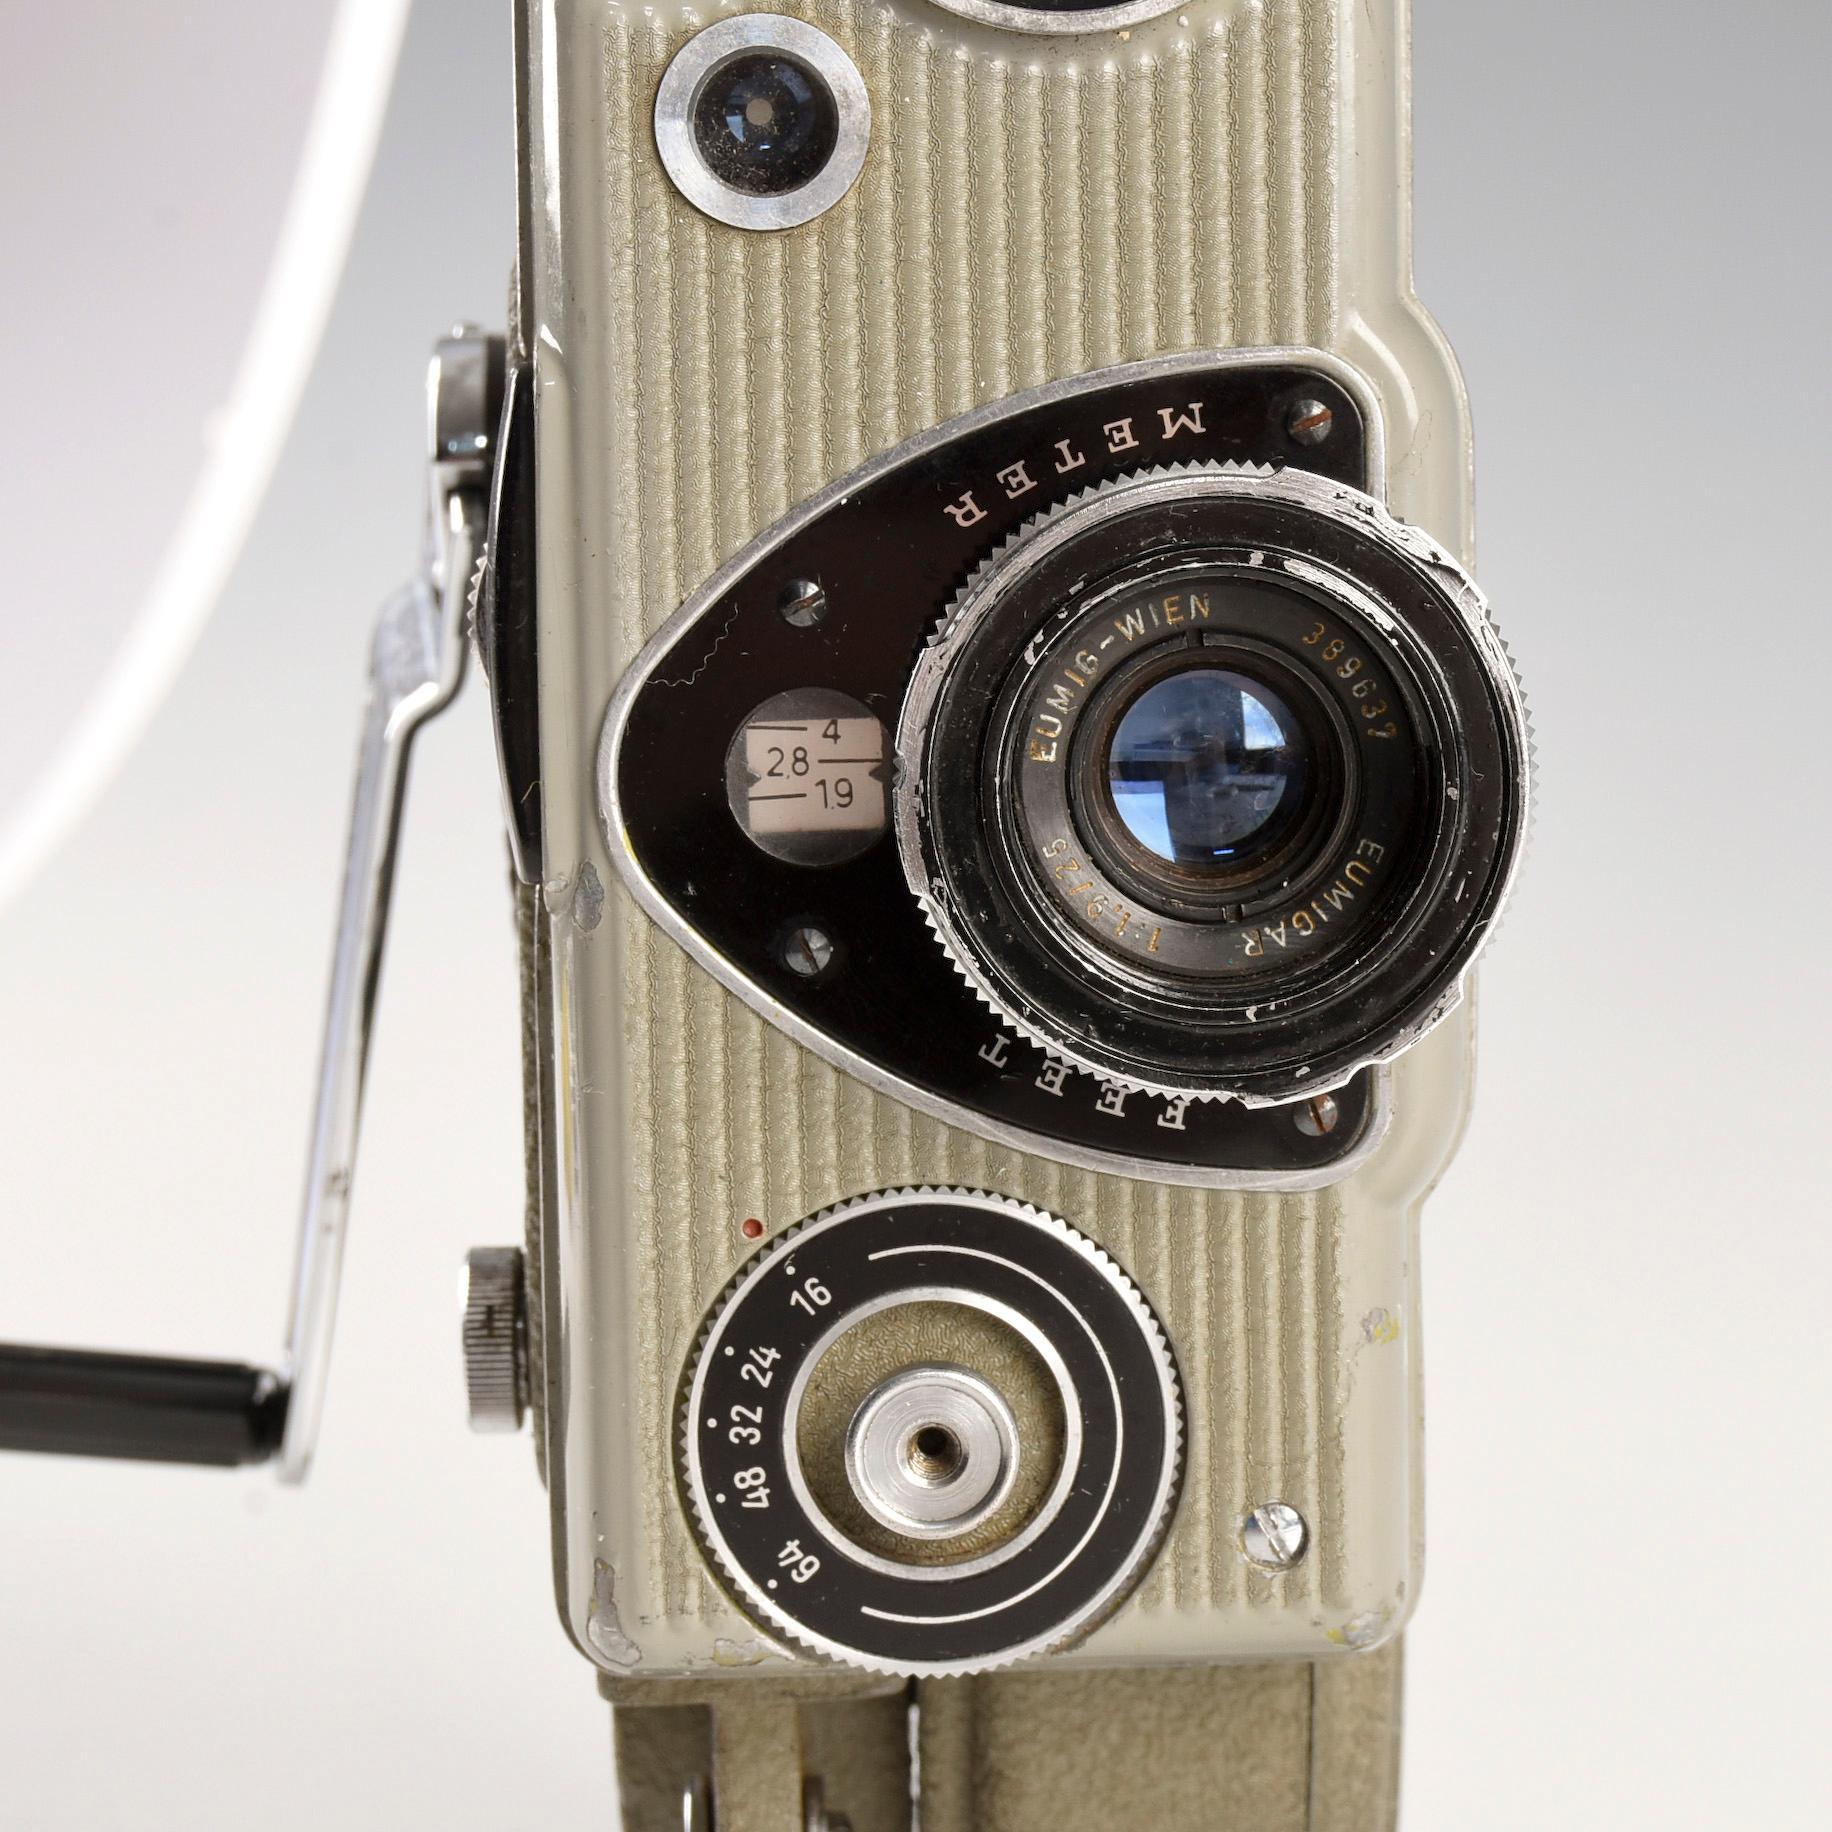 VINTAGE AUSTRIAN EUMIG C 16 MOTION PICTURE CAMERA - Image 4 of 6